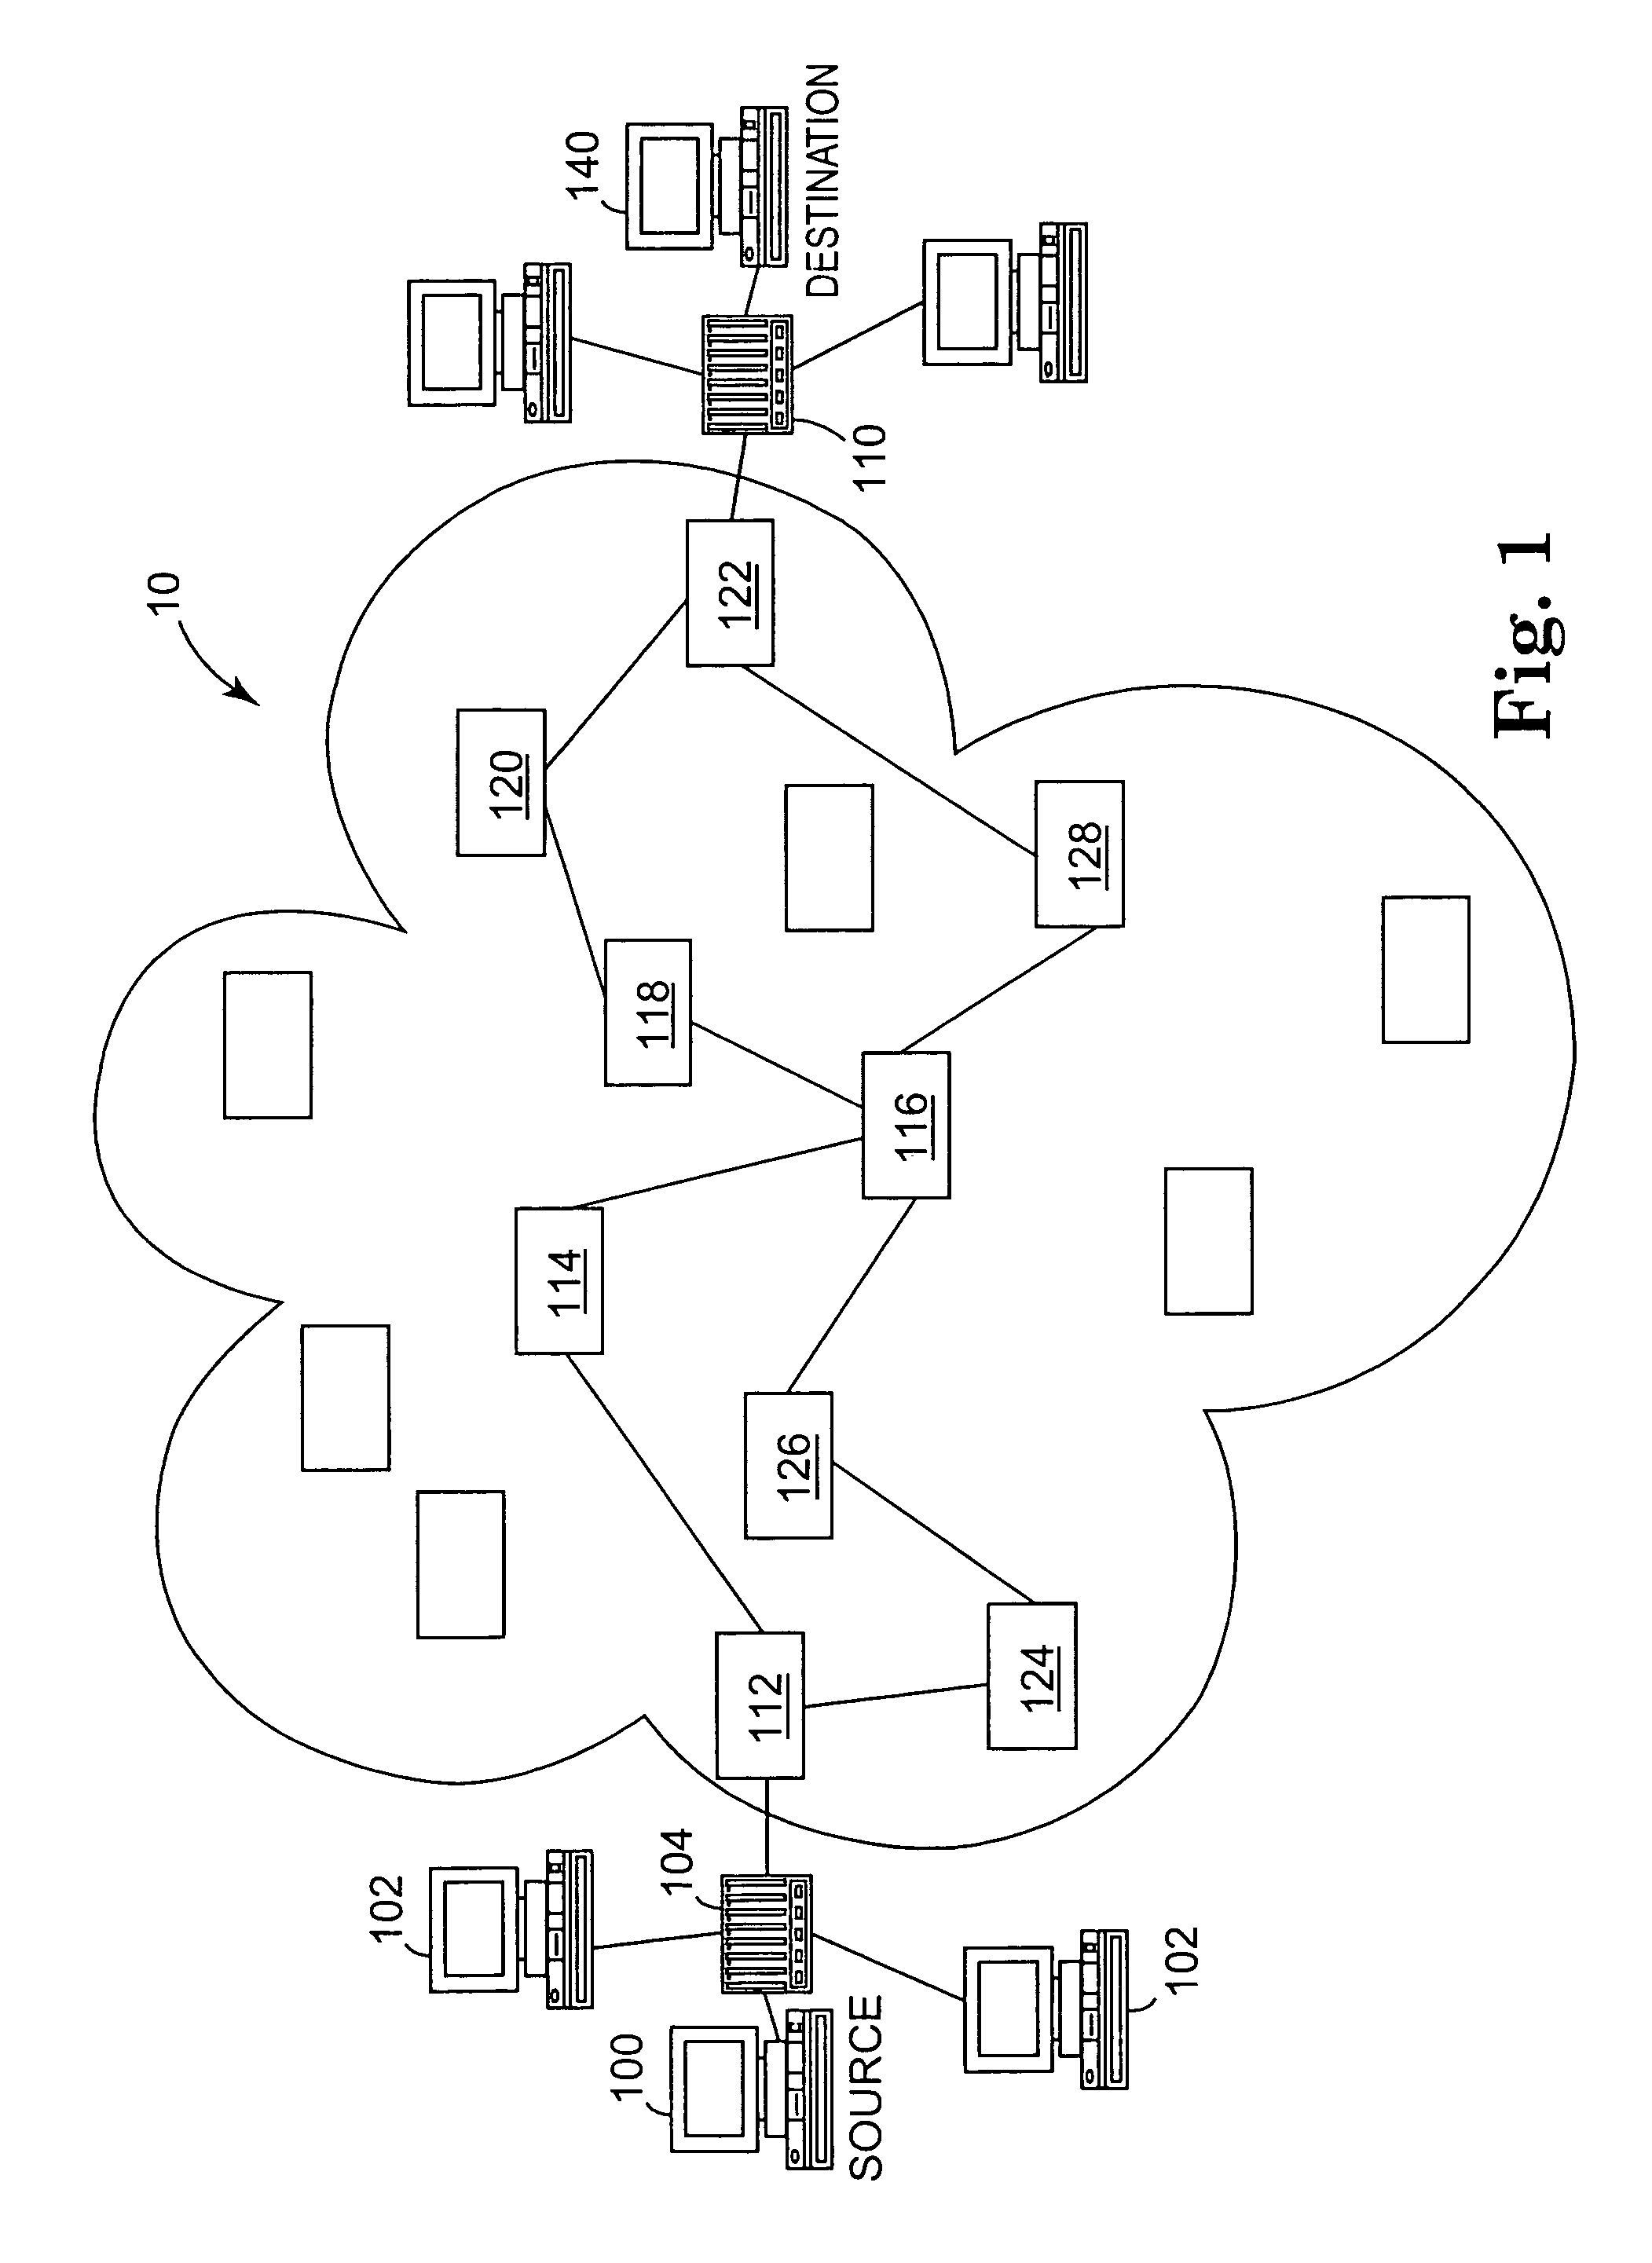 Multi-service queuing method and apparatus that provides exhaustive arbitration, load balancing, and support for rapid port failover